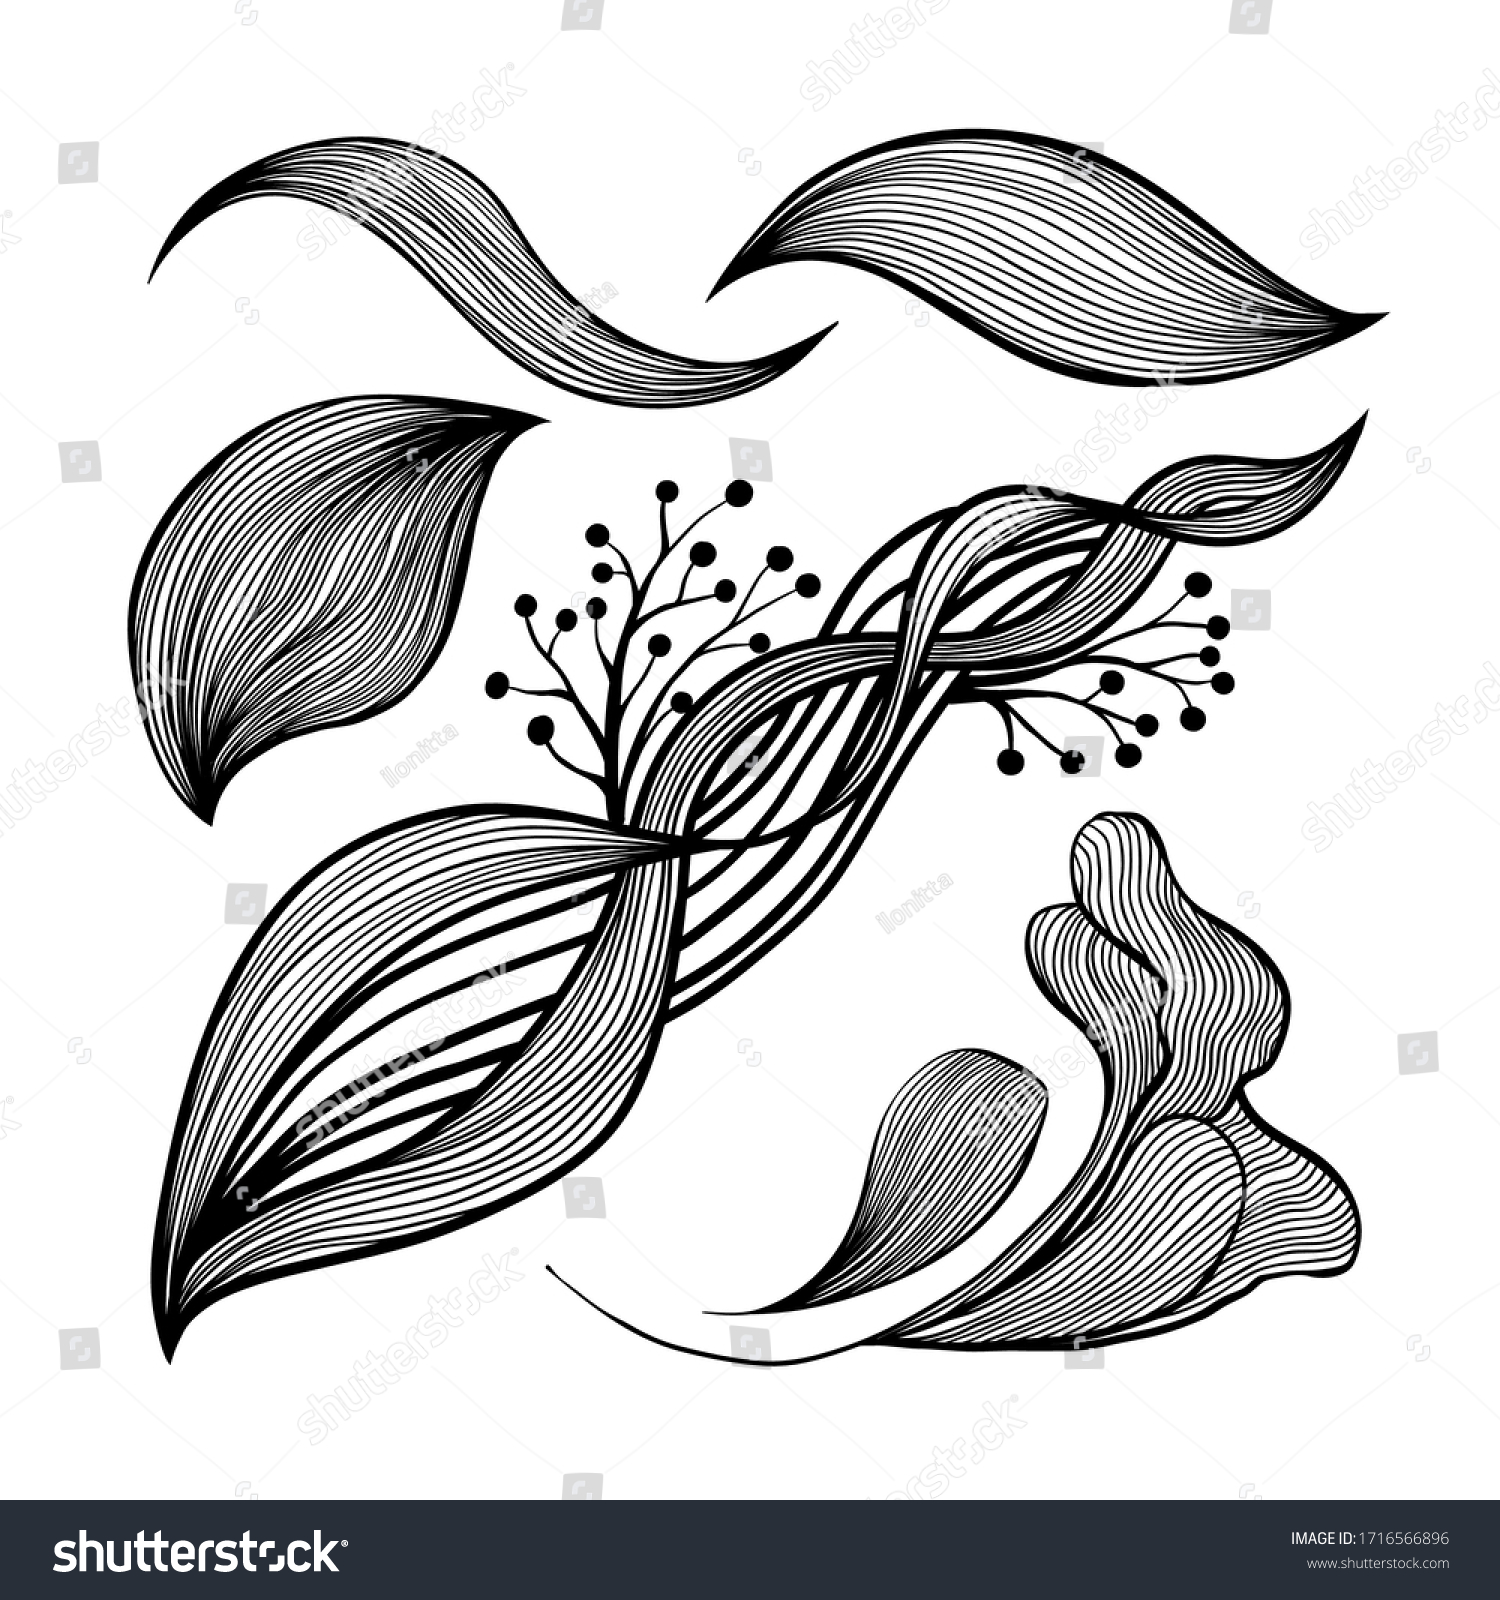 SVG of Abstract waves black and white line art decoration set for wallpaper and wall art design. Use for laser cutting. Modern contour drawign elements wavy collection svg